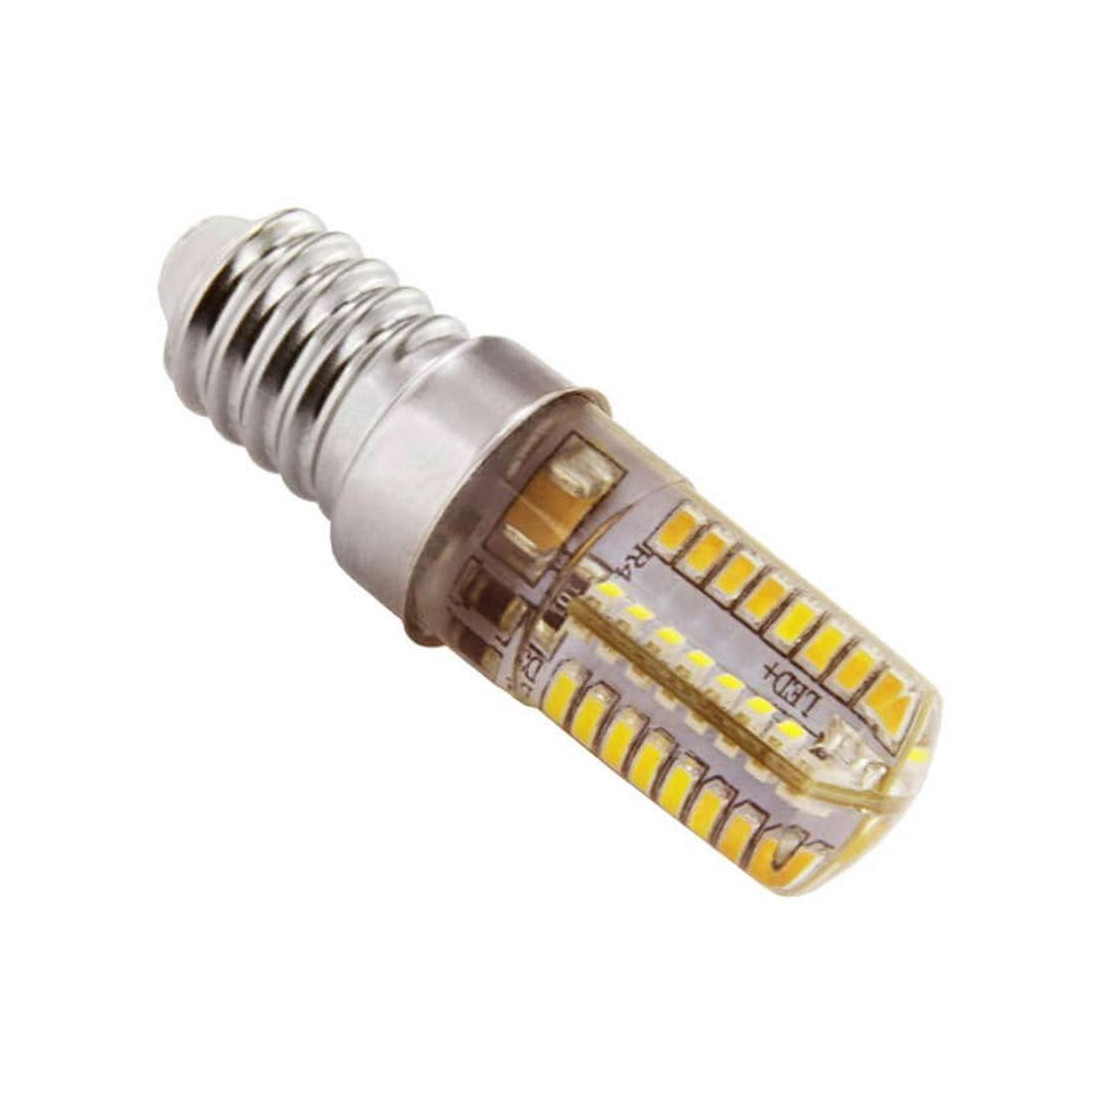 https://www.starled.fr/3793-thickbox_default/ampoule-piccoled-a-culot-e14-230-volts-64-led-smd-type-3014.jpg